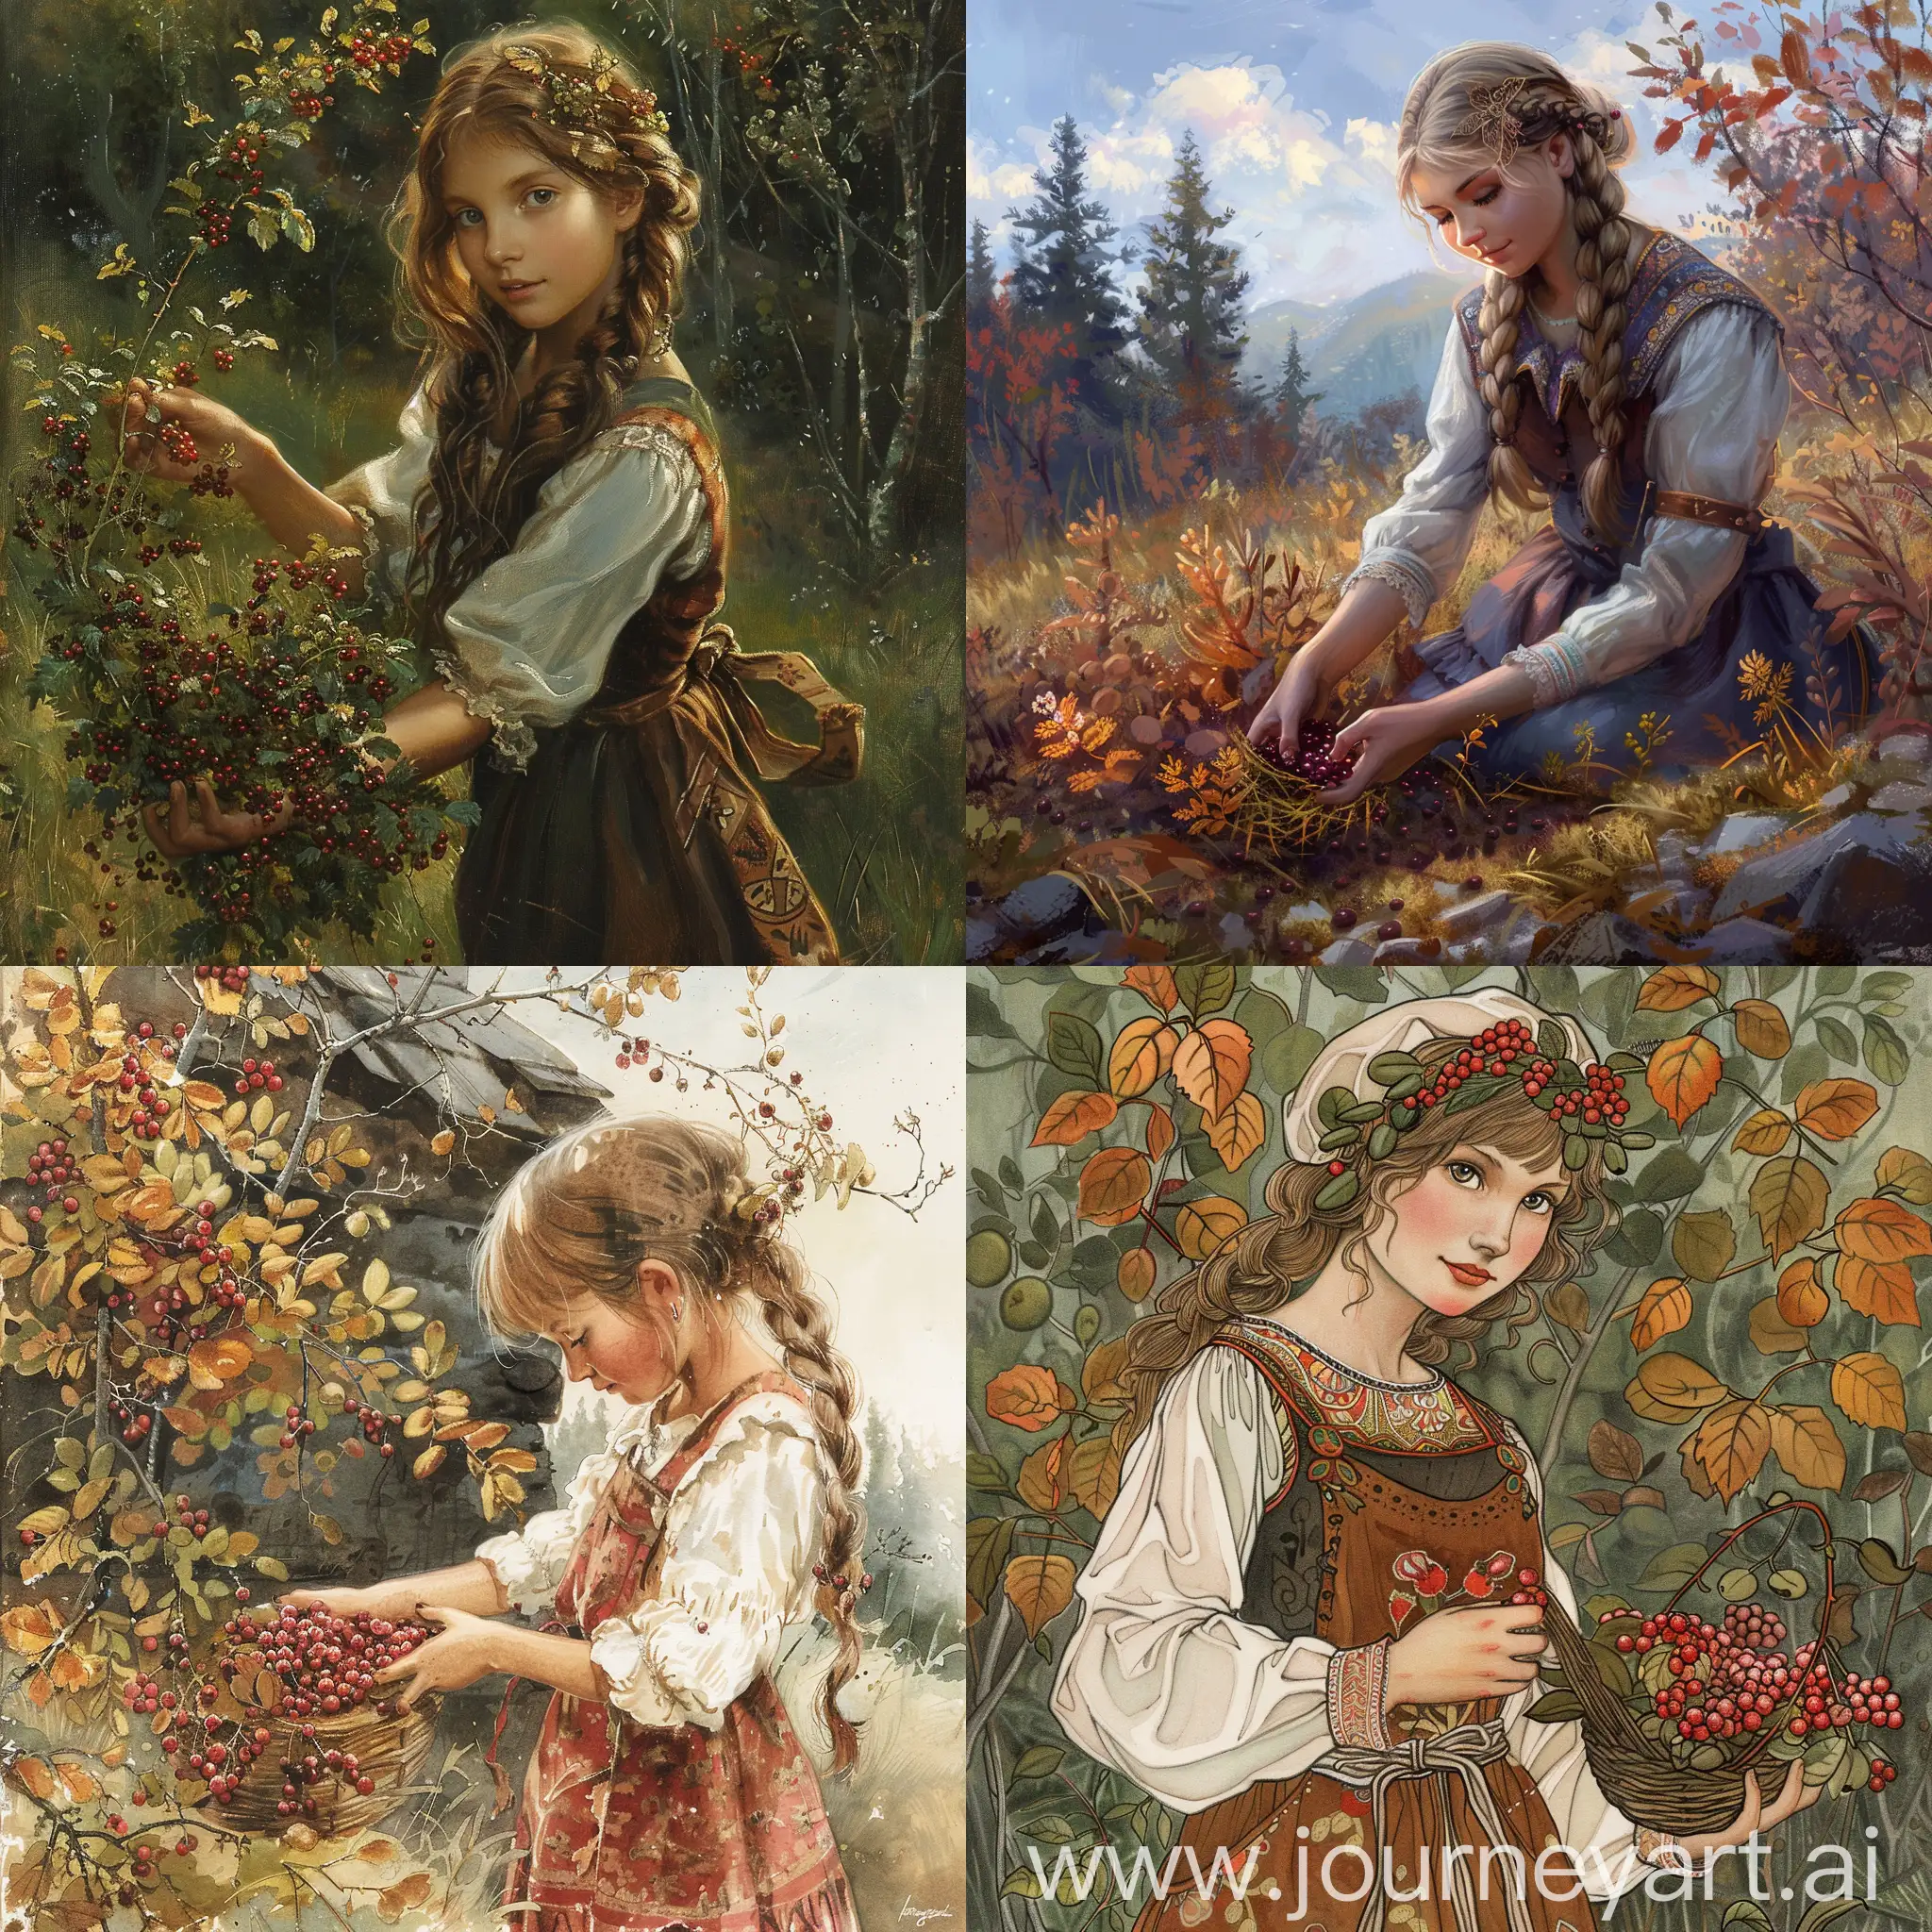 Beautiful-Girl-Collecting-Lingonberries-in-a-Forest